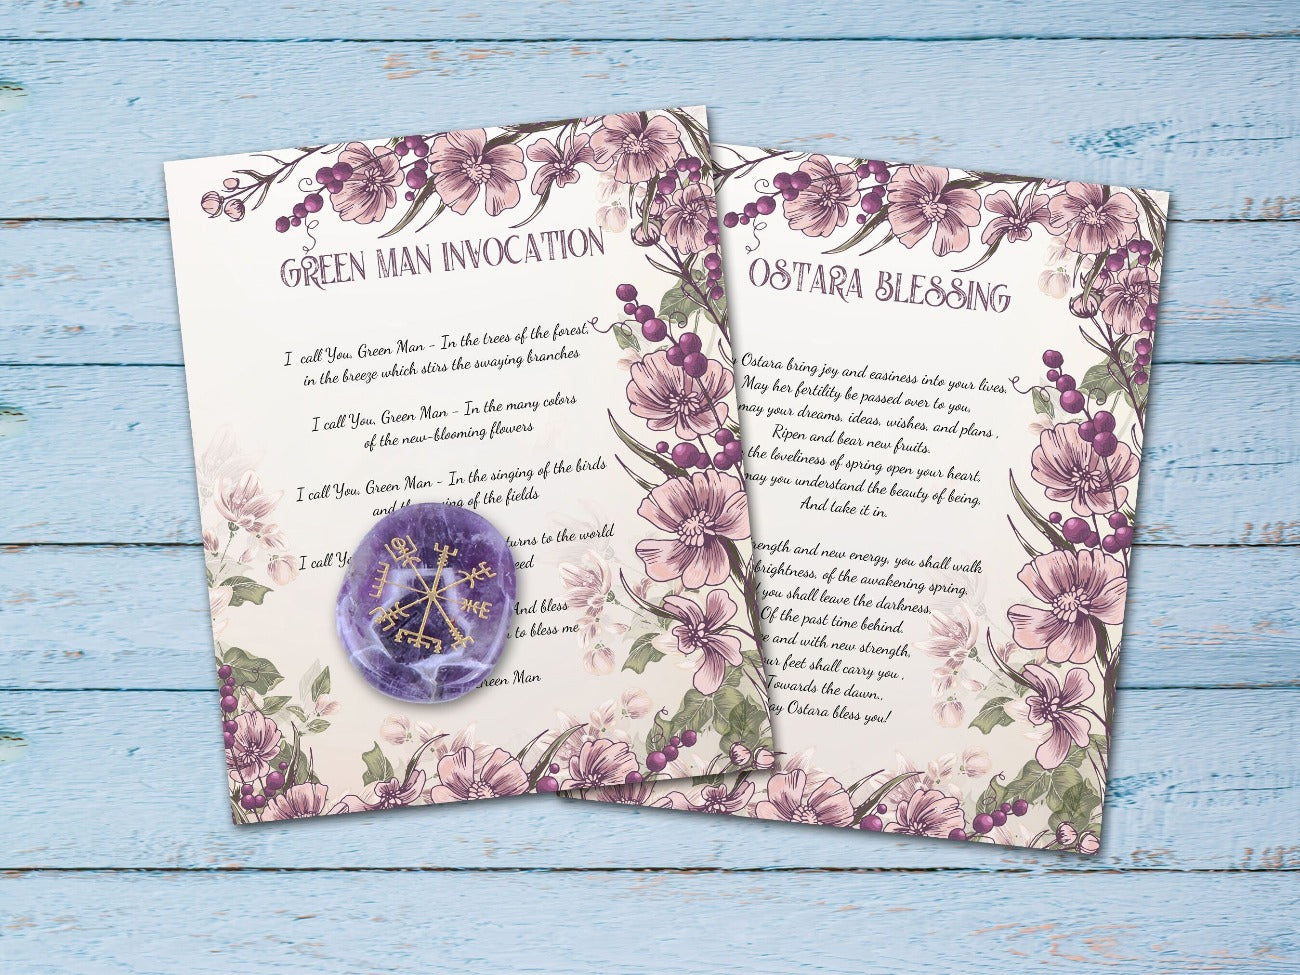 OSTARA SPELL CARDS, Green Man Invocation and Ostara Blessing cards placed on a rustic blue wood background - Morgana Magick Spell